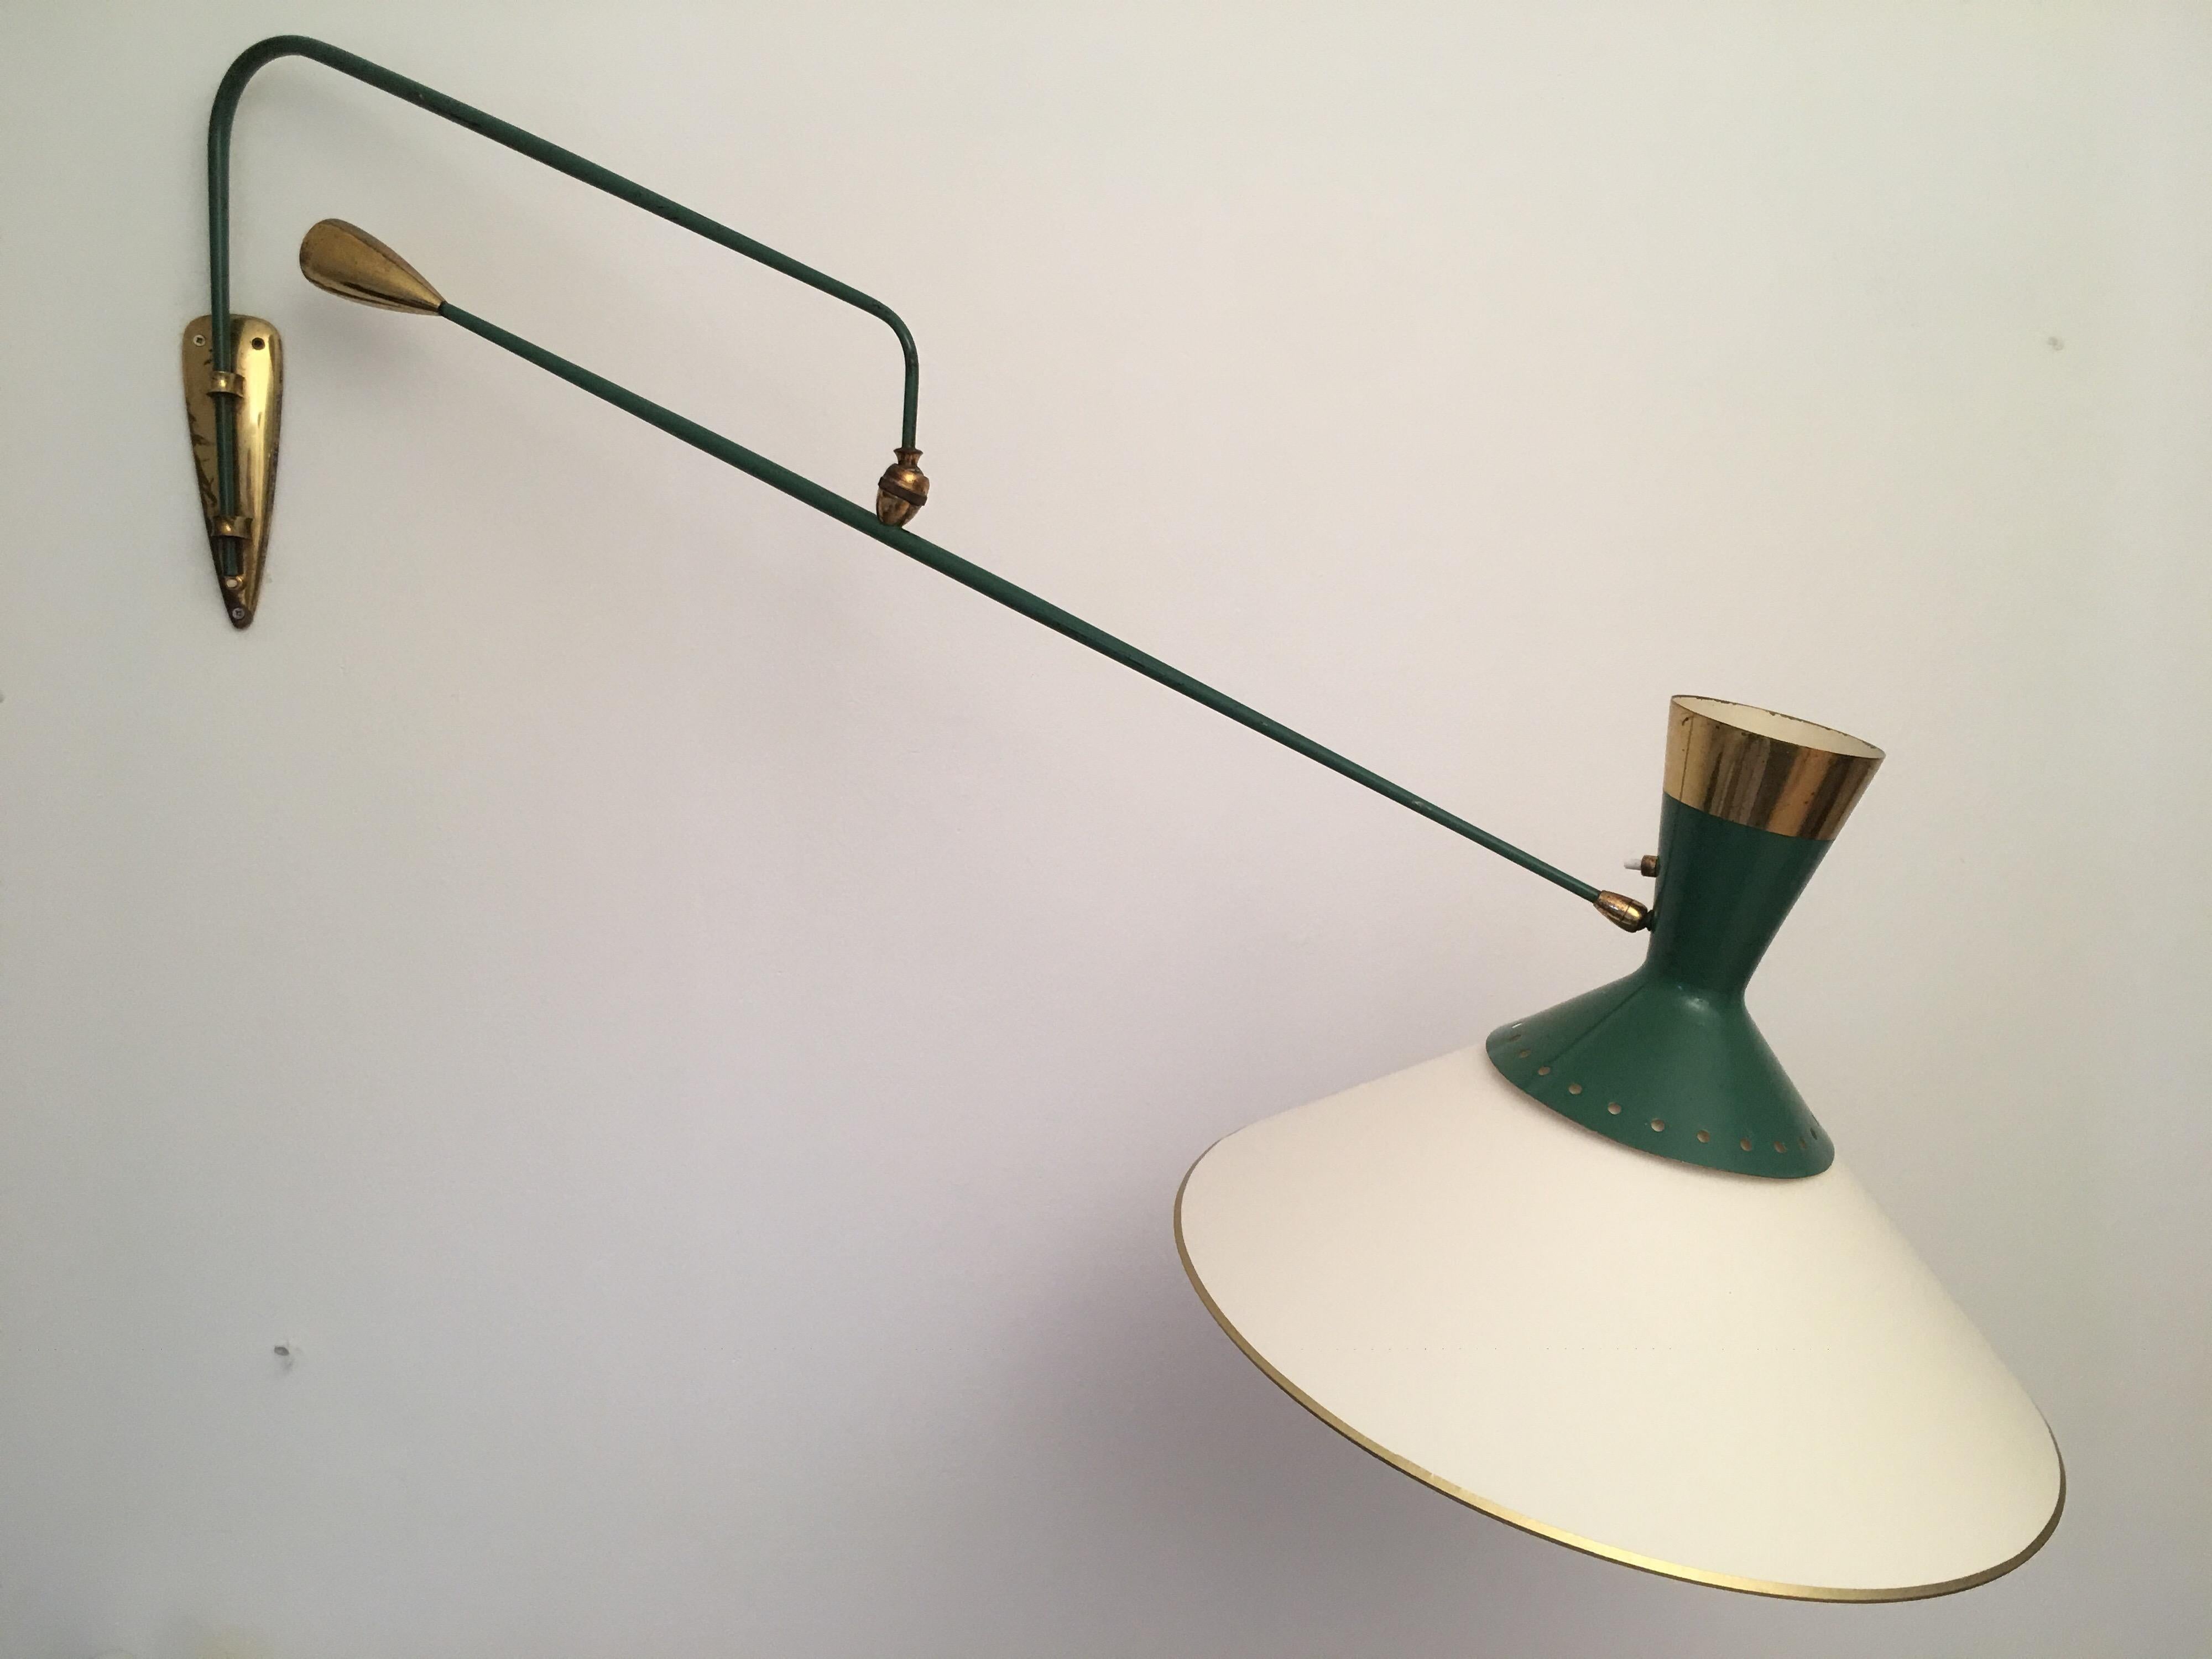 Arlus Green and Gilt Counter Balance Swing Arm Wall Lamp, French 1950s For Sale 1